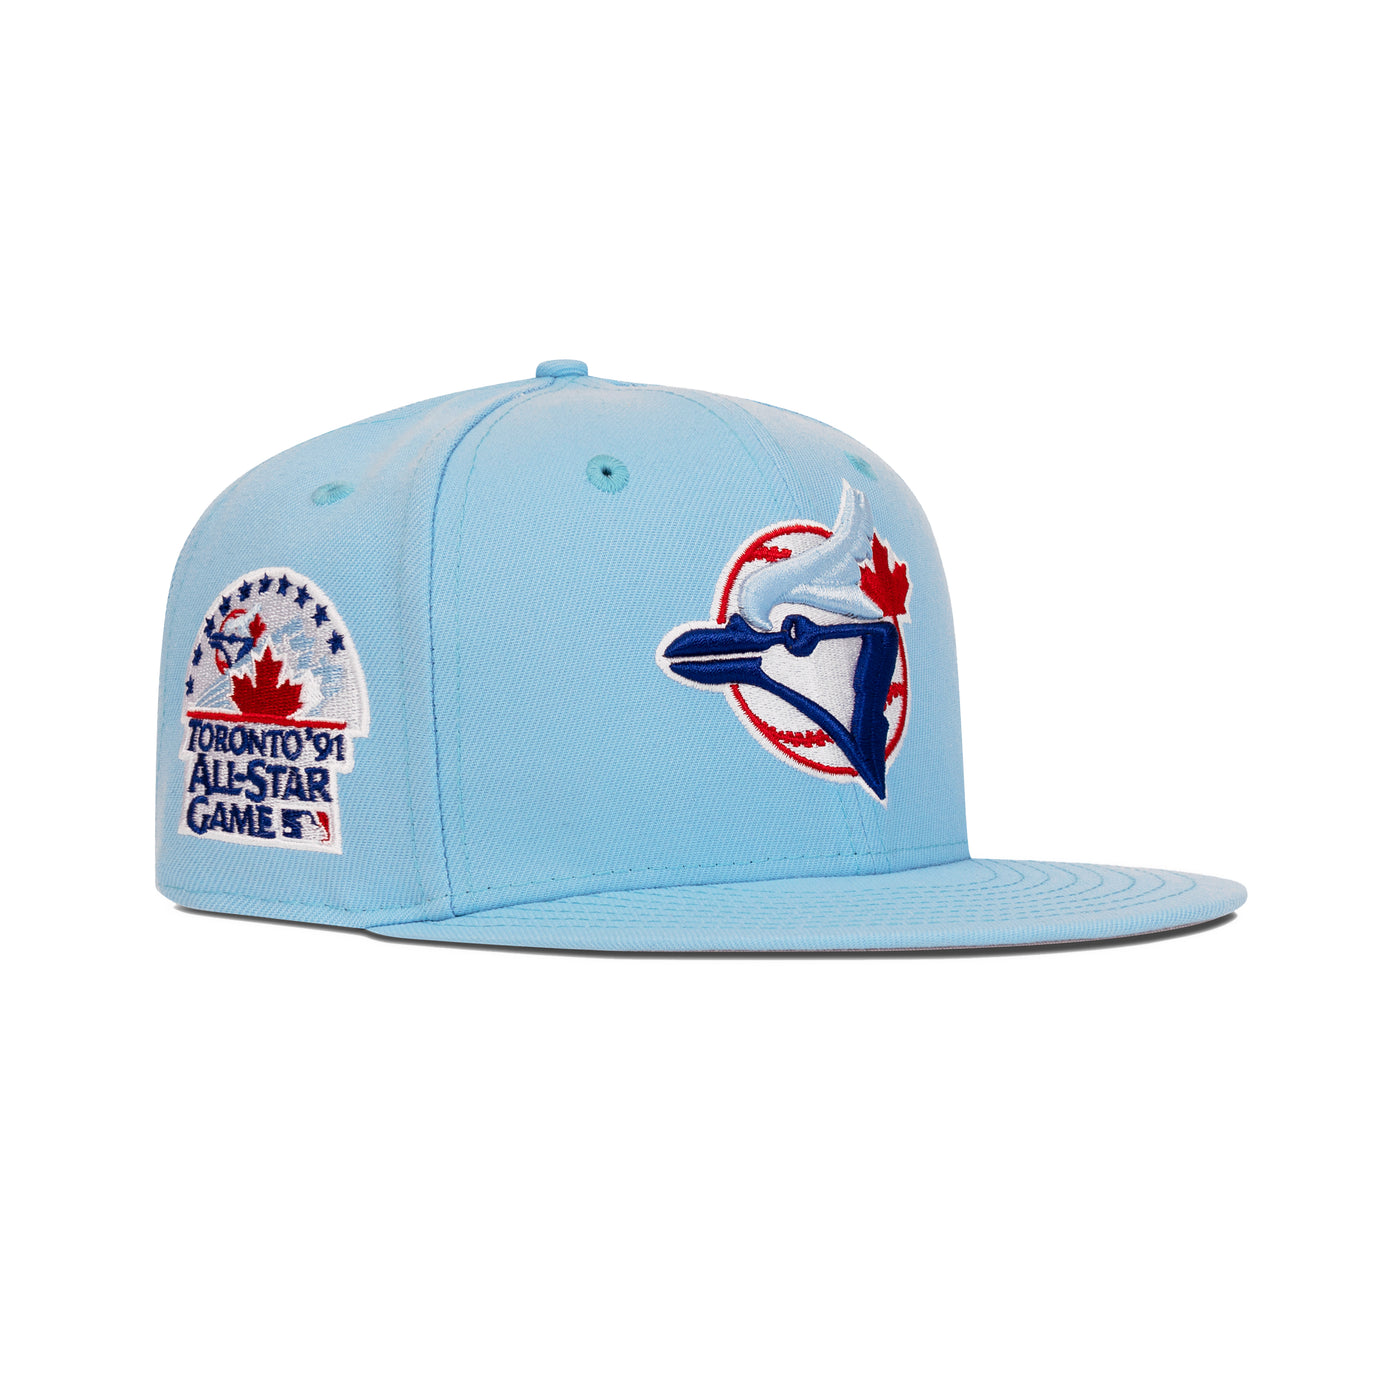 TORONTO BLUE JAYS ALL STAR GAME 1991 NEW ERA 59FIFTY FITTED HAT